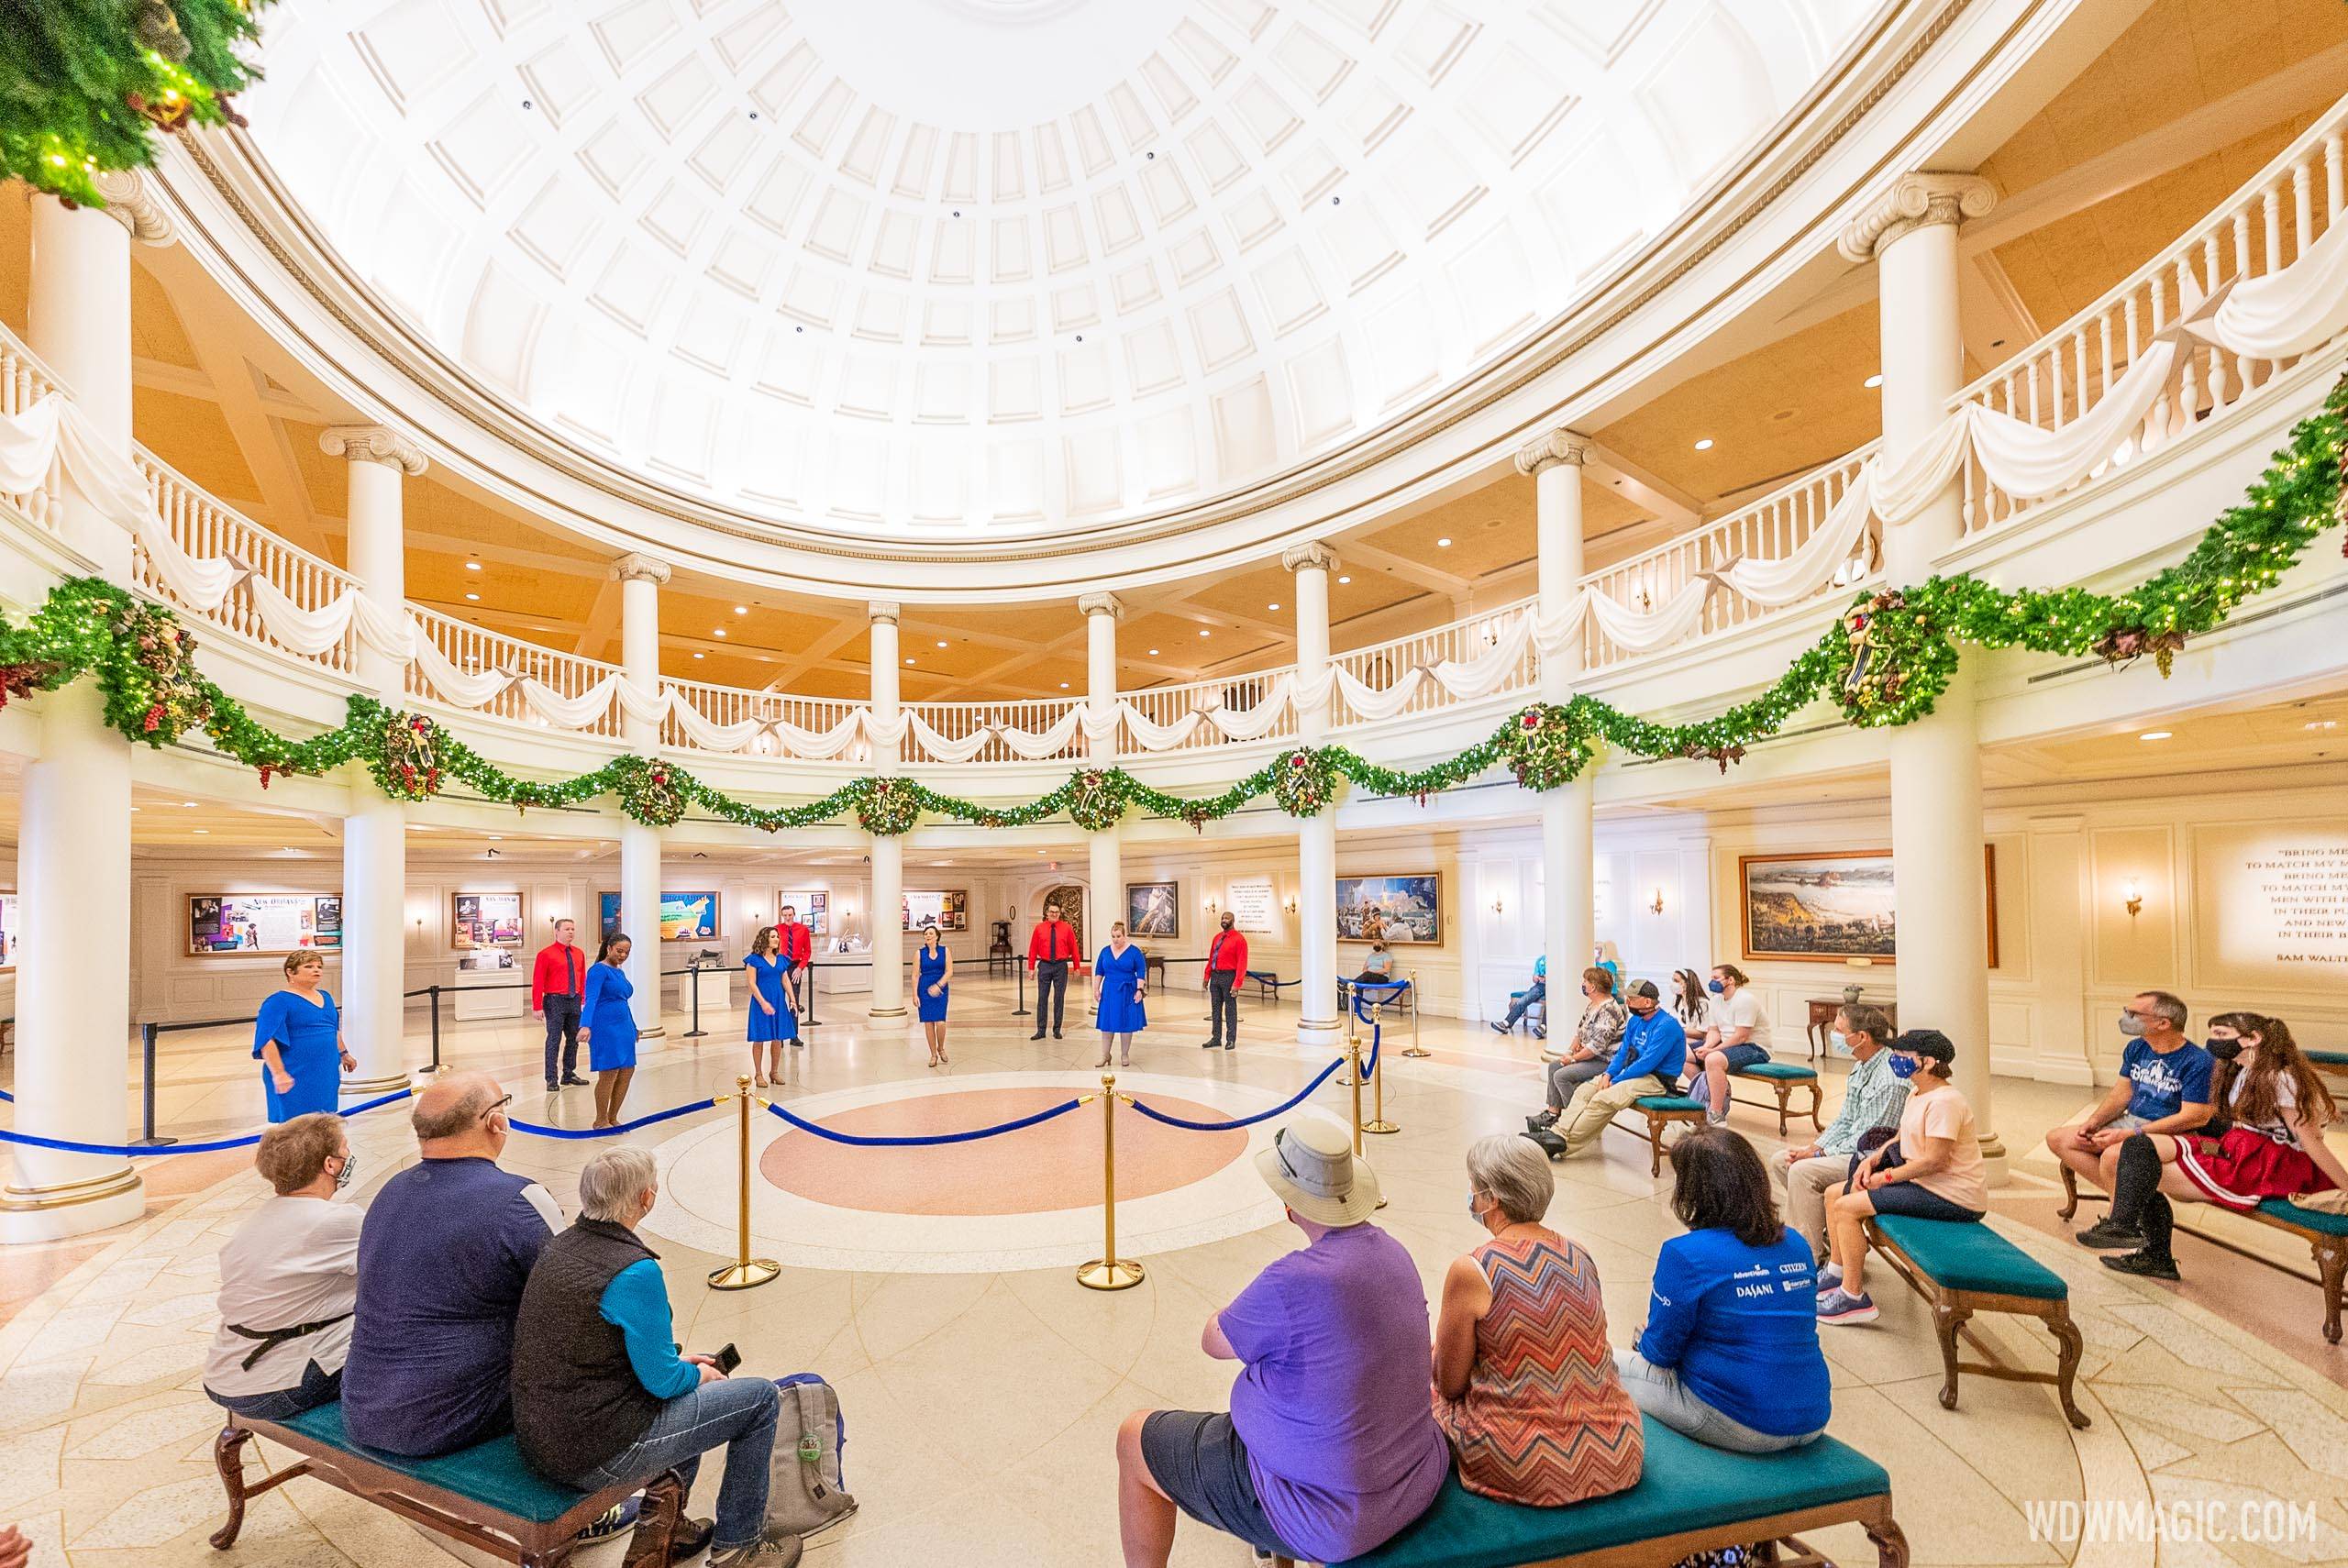 Voices of Liberty return to the American Adventure Rotunda at EPCOT with new arrangements and a new look